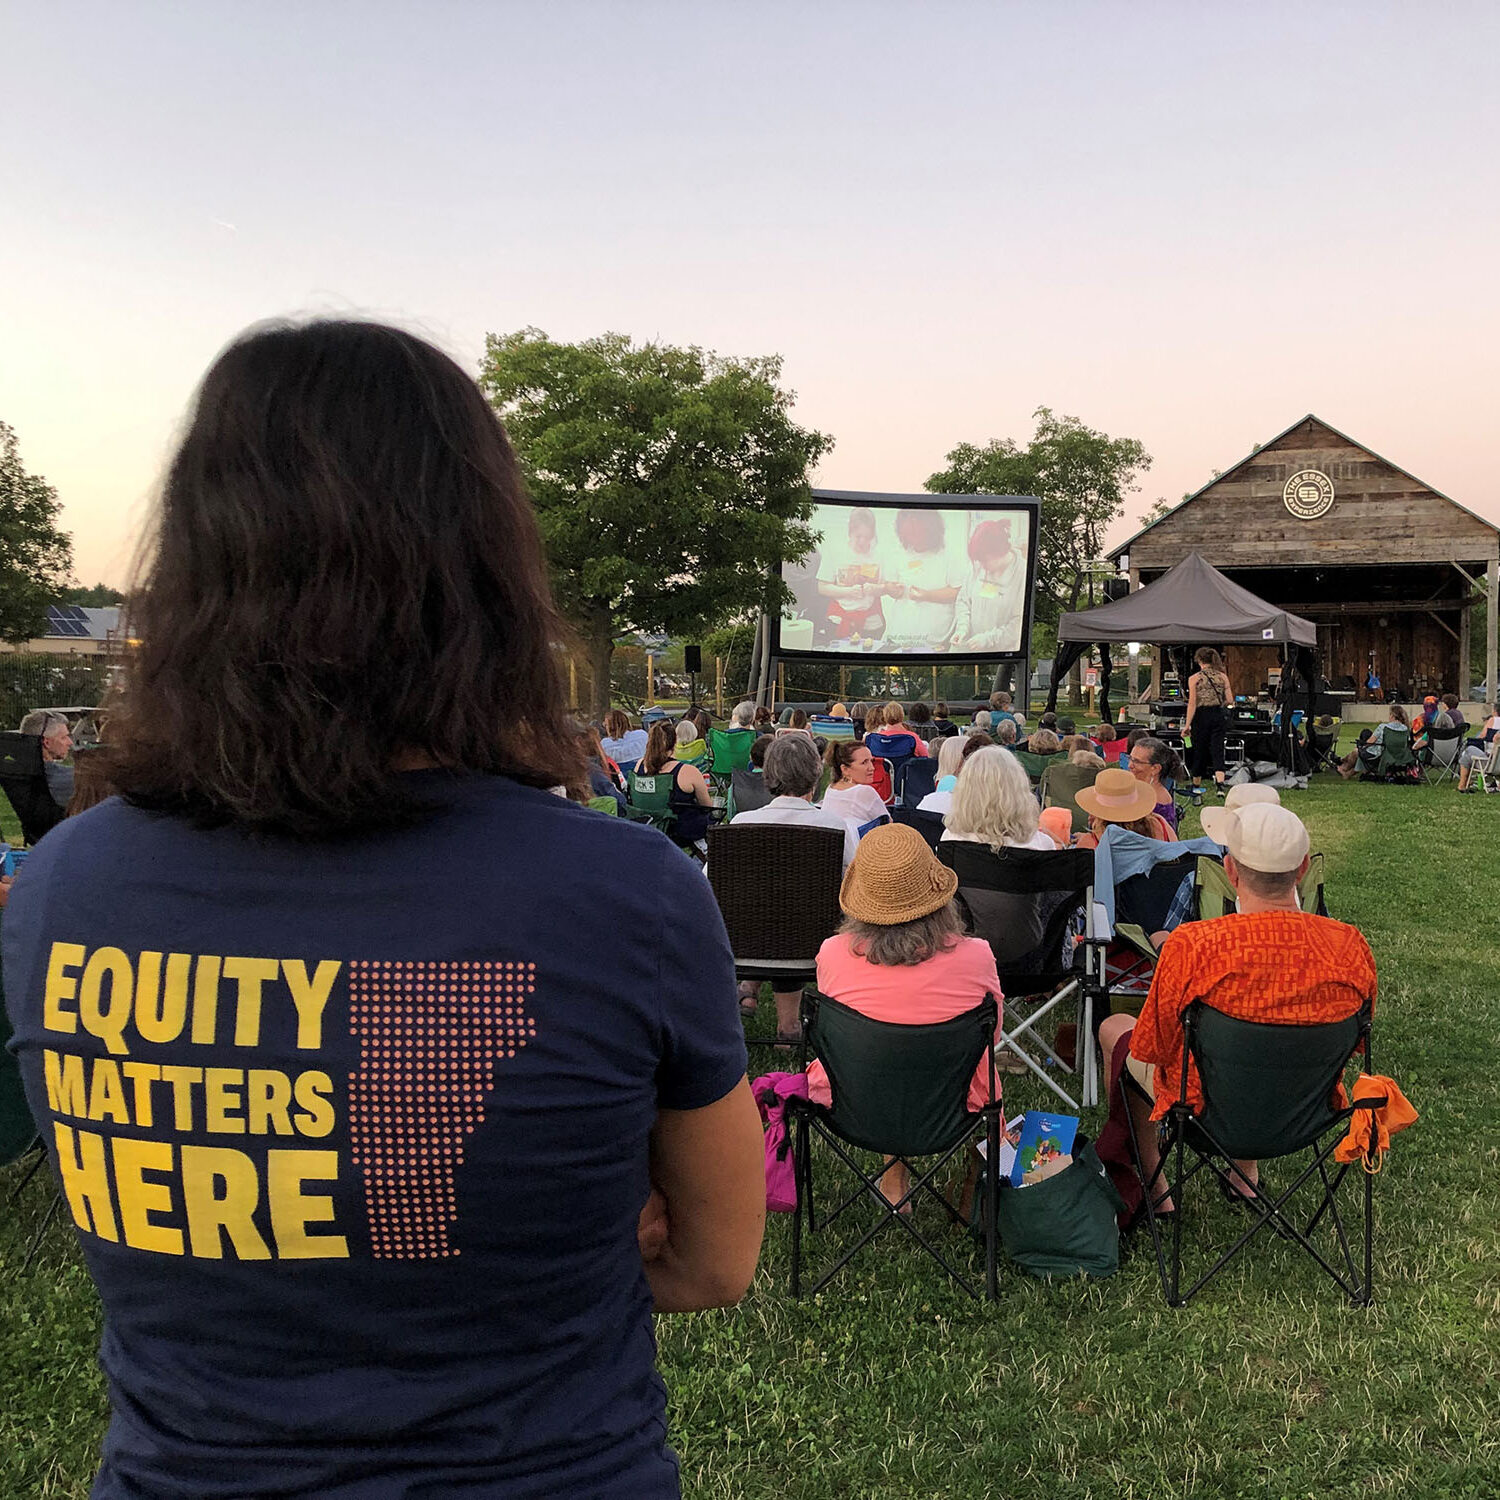 VWW staff member watches film at a LUNAFEST outdoor film screening. The back of her t-shirt reads Equity Matters Here. LUNAFEST is one of Vermont Works for Women's annual fundraisers.